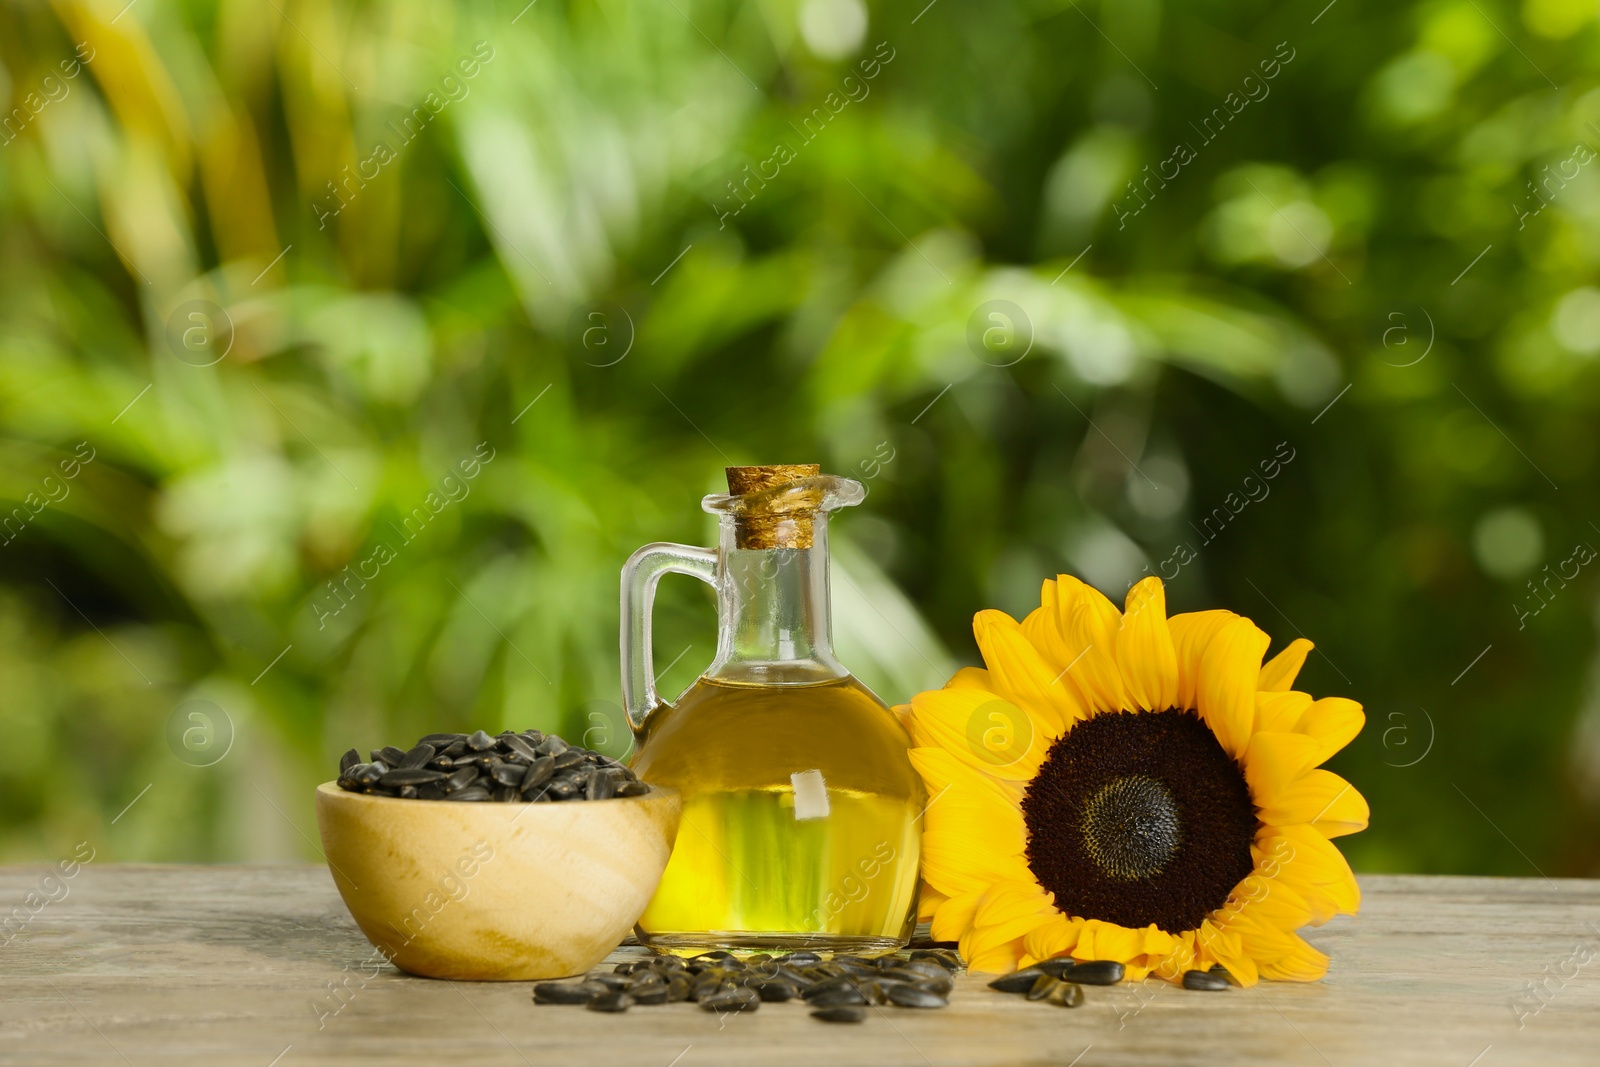 Photo of Sunflower cooking oil, seeds and yellow flower on wooden table outdoors